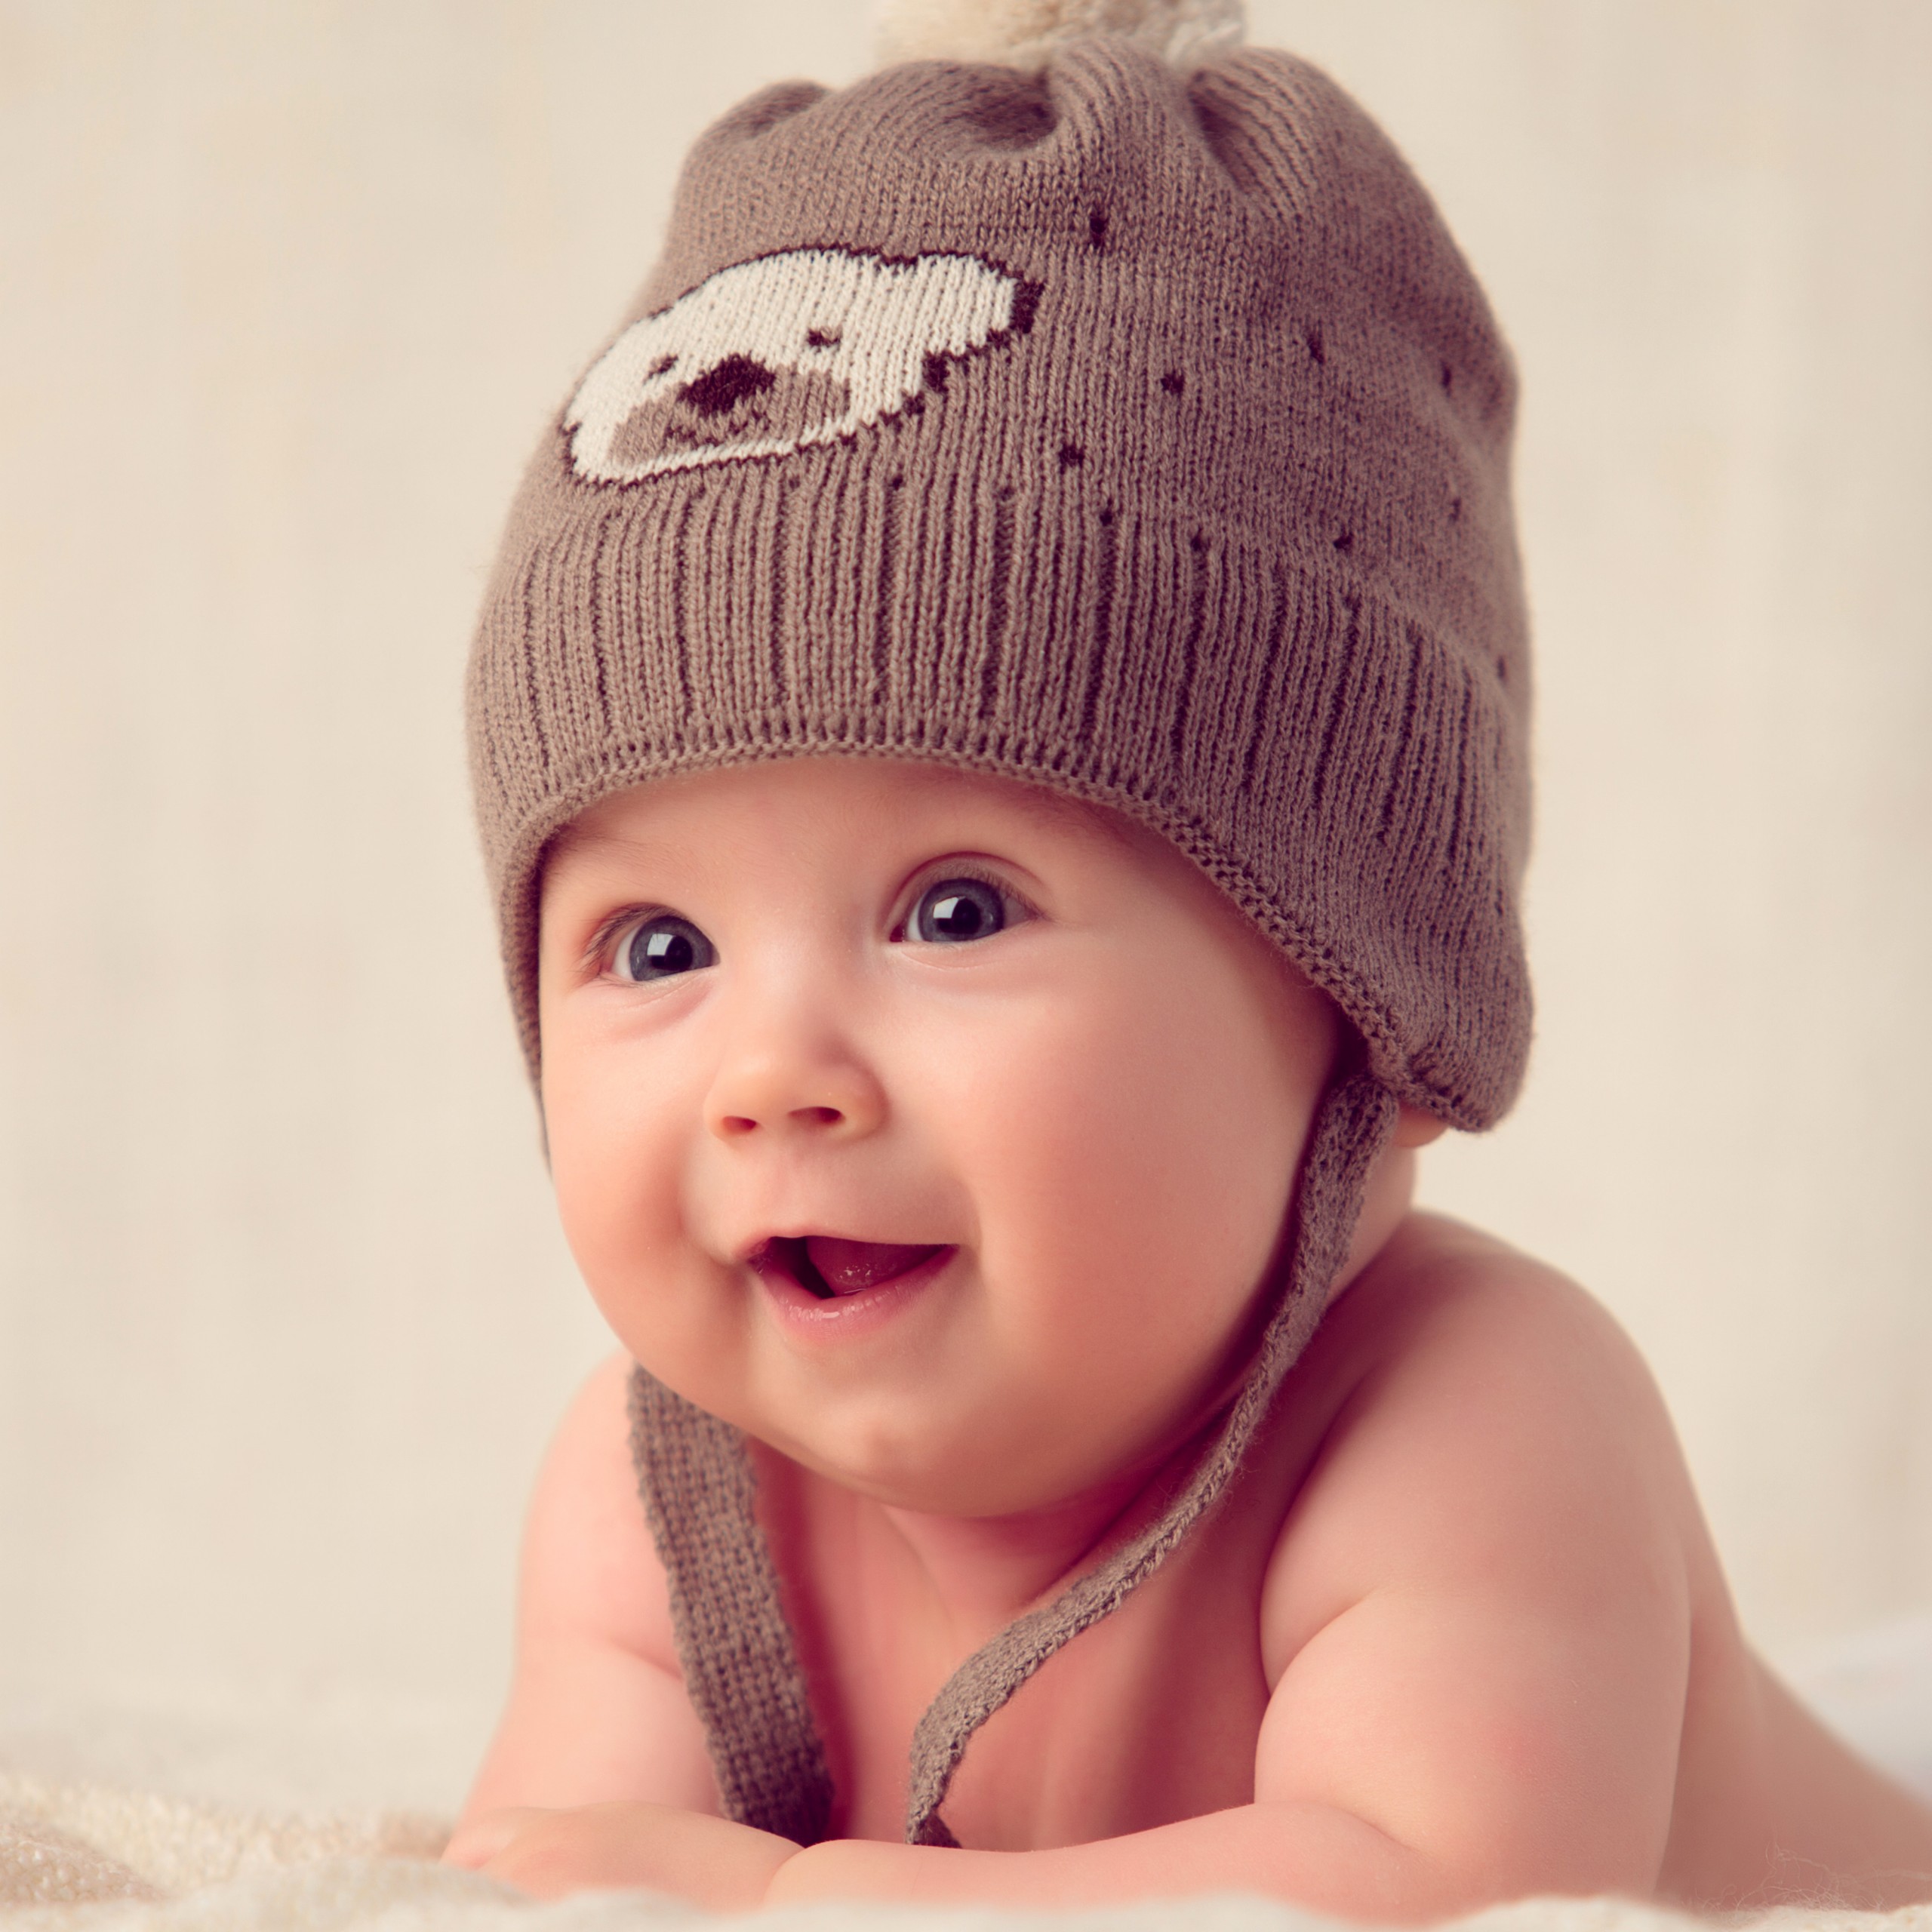 Cute Baby Wallpaper For Mobile - 2560x2560 Wallpaper 